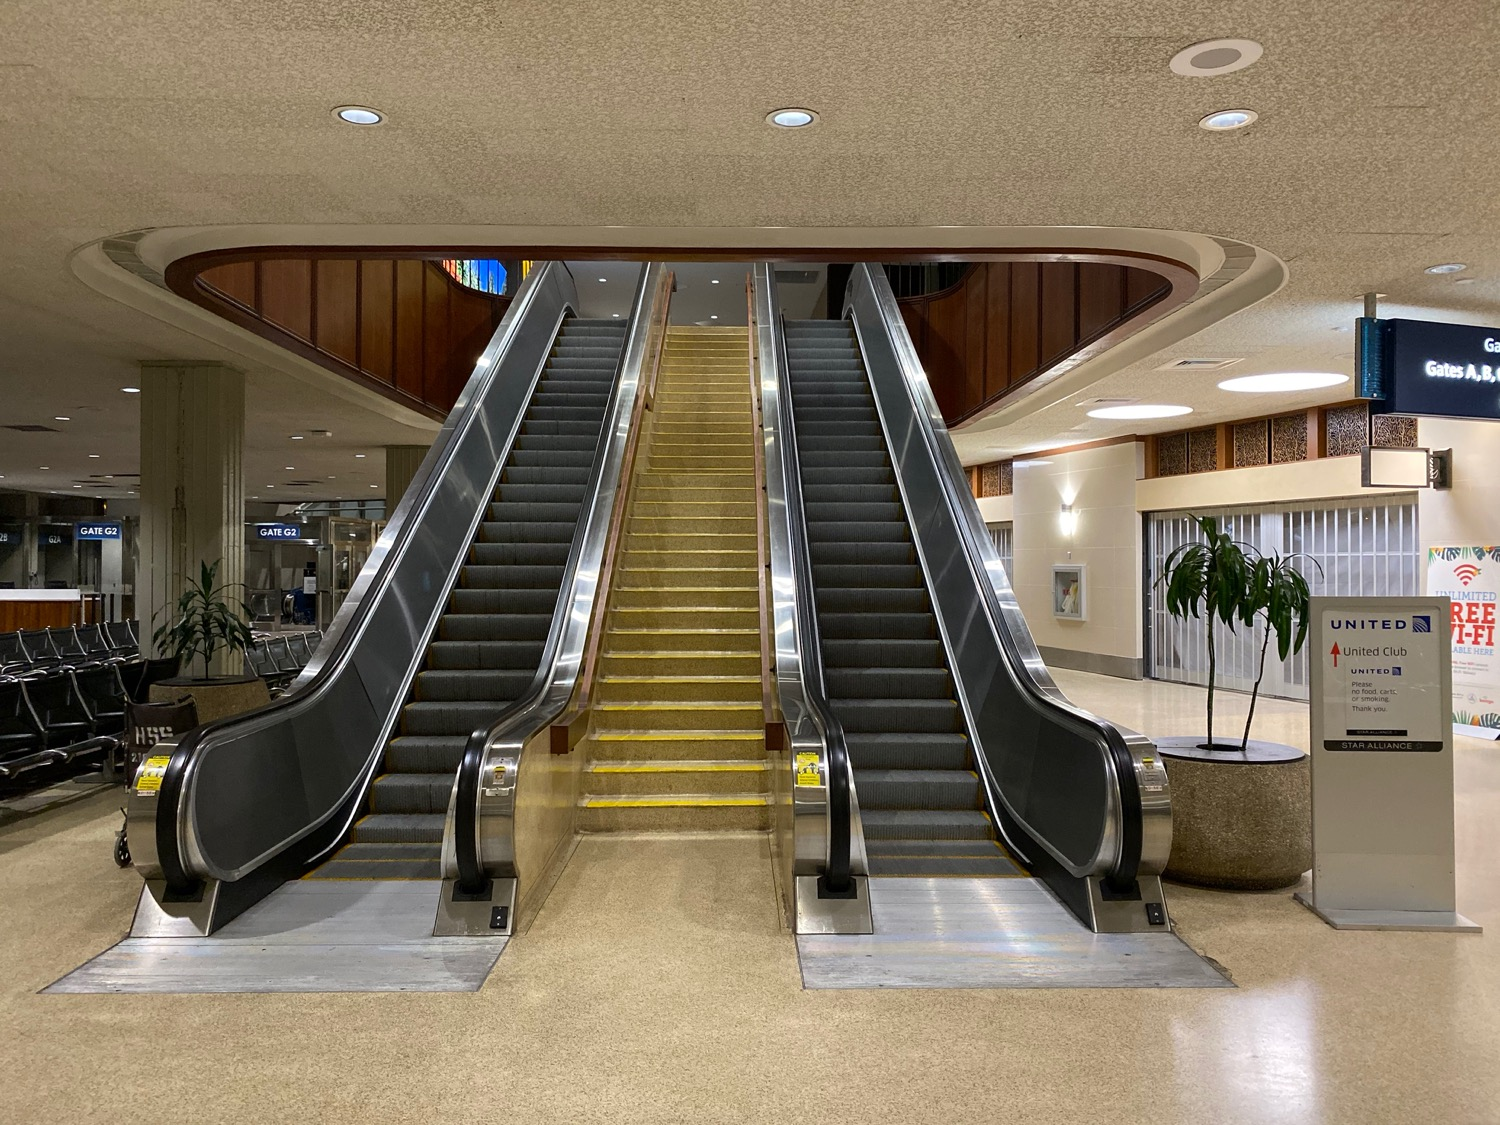 PICTURE OF THE ESCALATORS LEADING UP TO THE CLUB LOUNGE